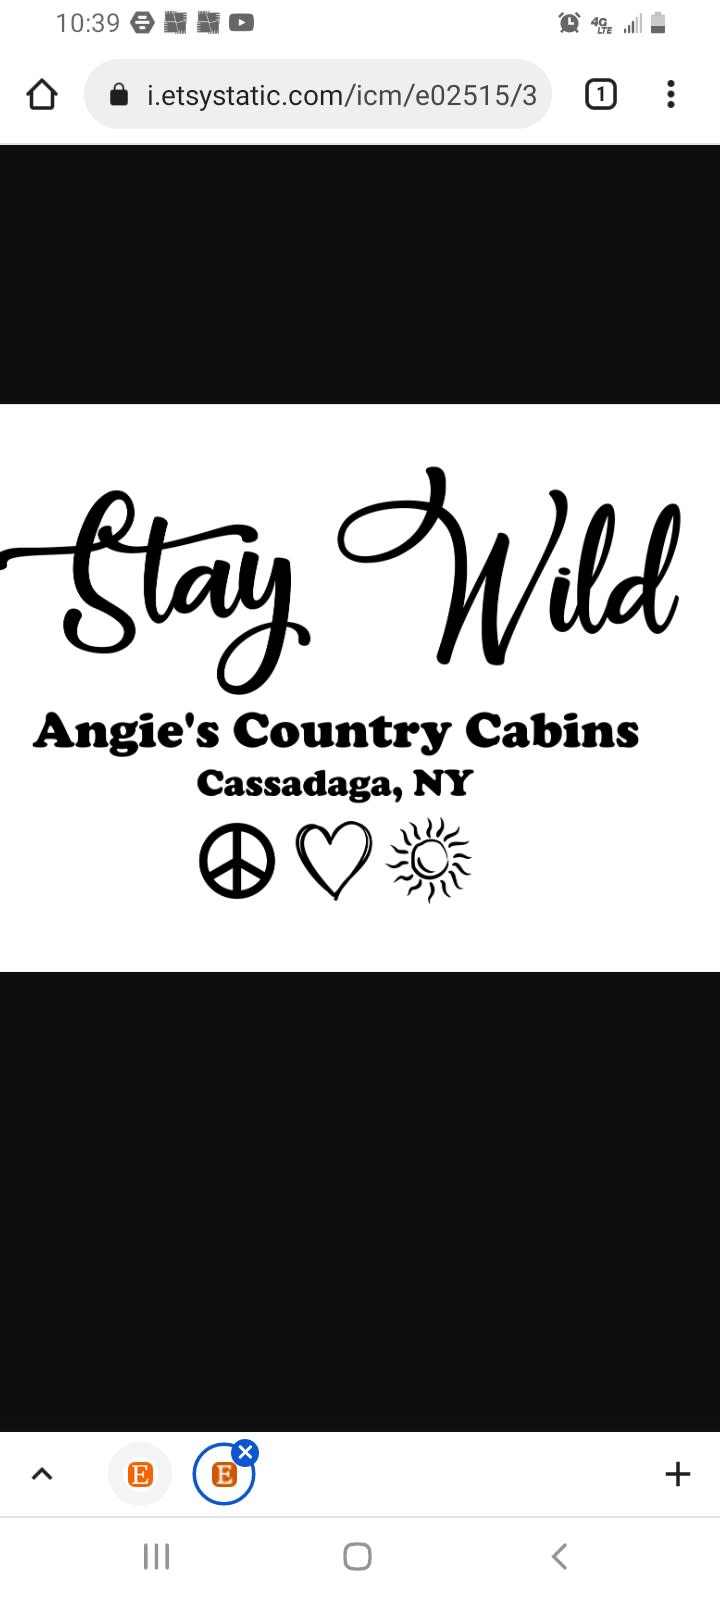 Angie's Country Cabins